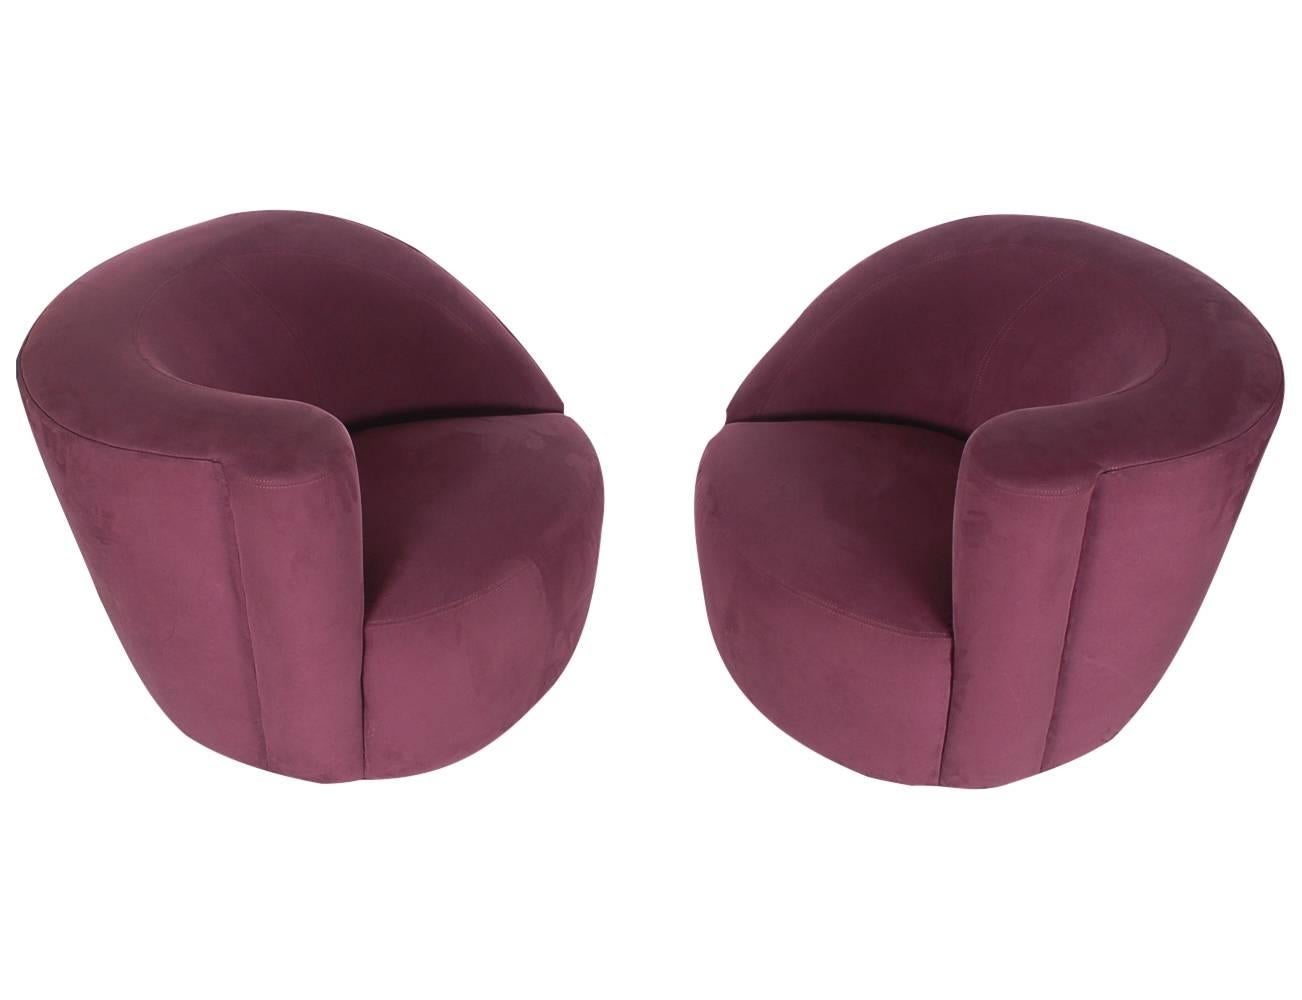 Matching set of "Corkscrew" Nautilus chairs designed by Vladimir Kagan and manufactured by Directional Furniture. They feature the original upholstery from the 1980s, done in dark purple or plum suede. Very comfortable swiveling lounge